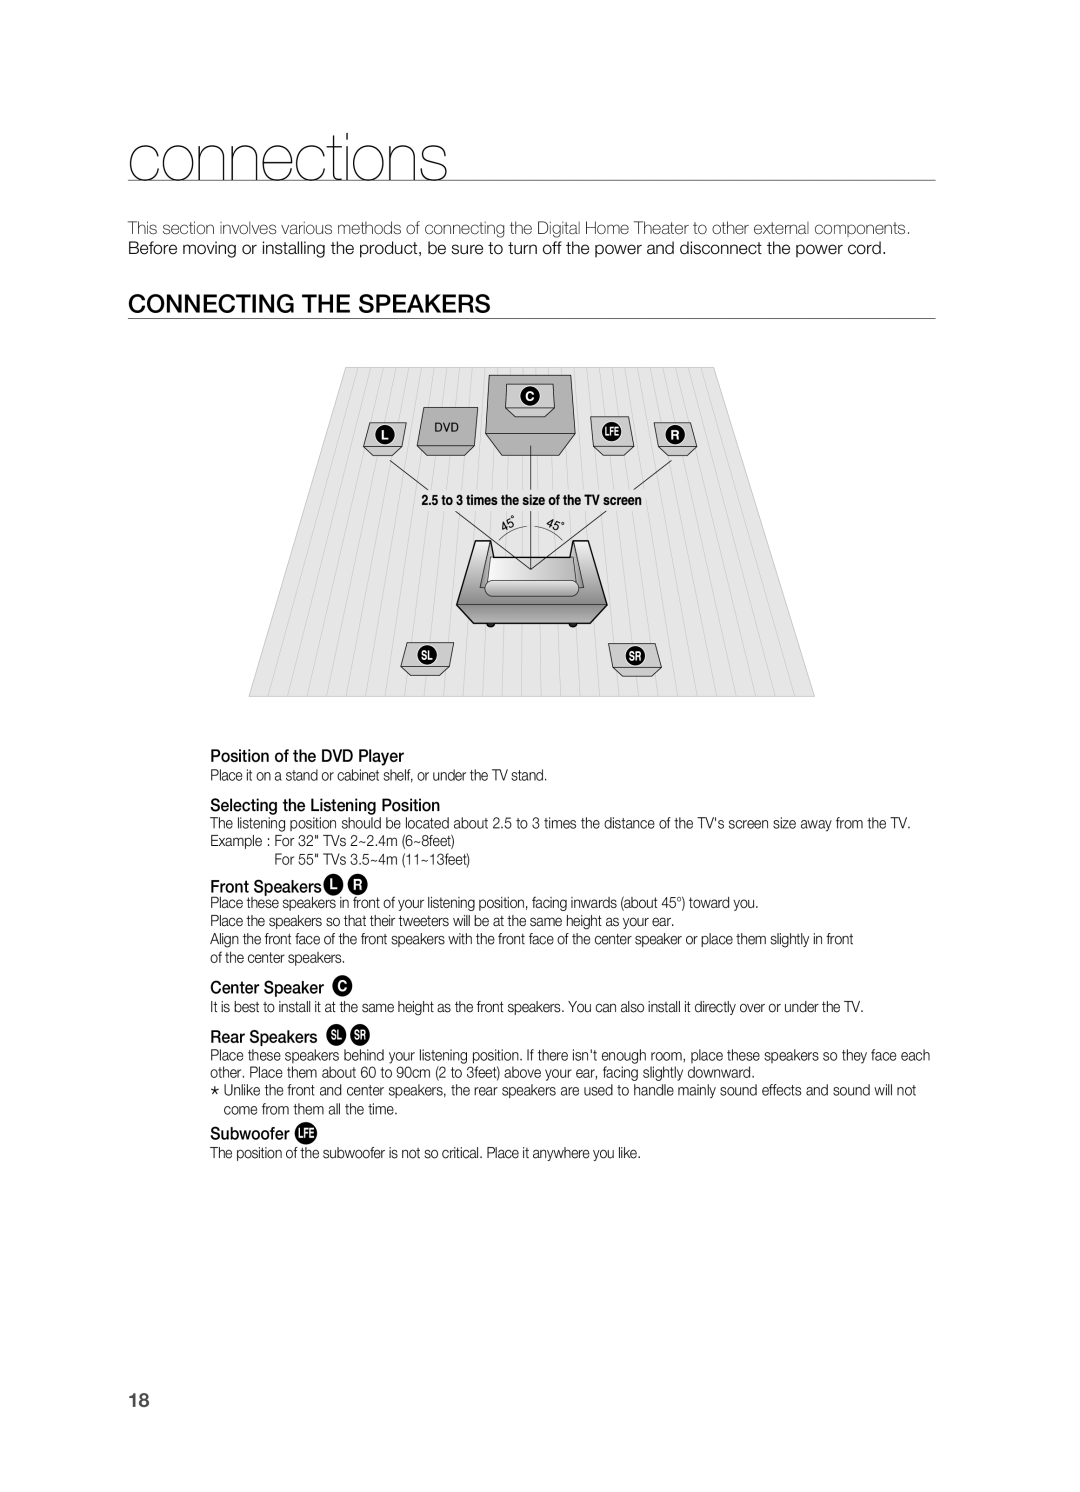 Samsung HT-TWZ315 manual connections, Connecting the Speakers 